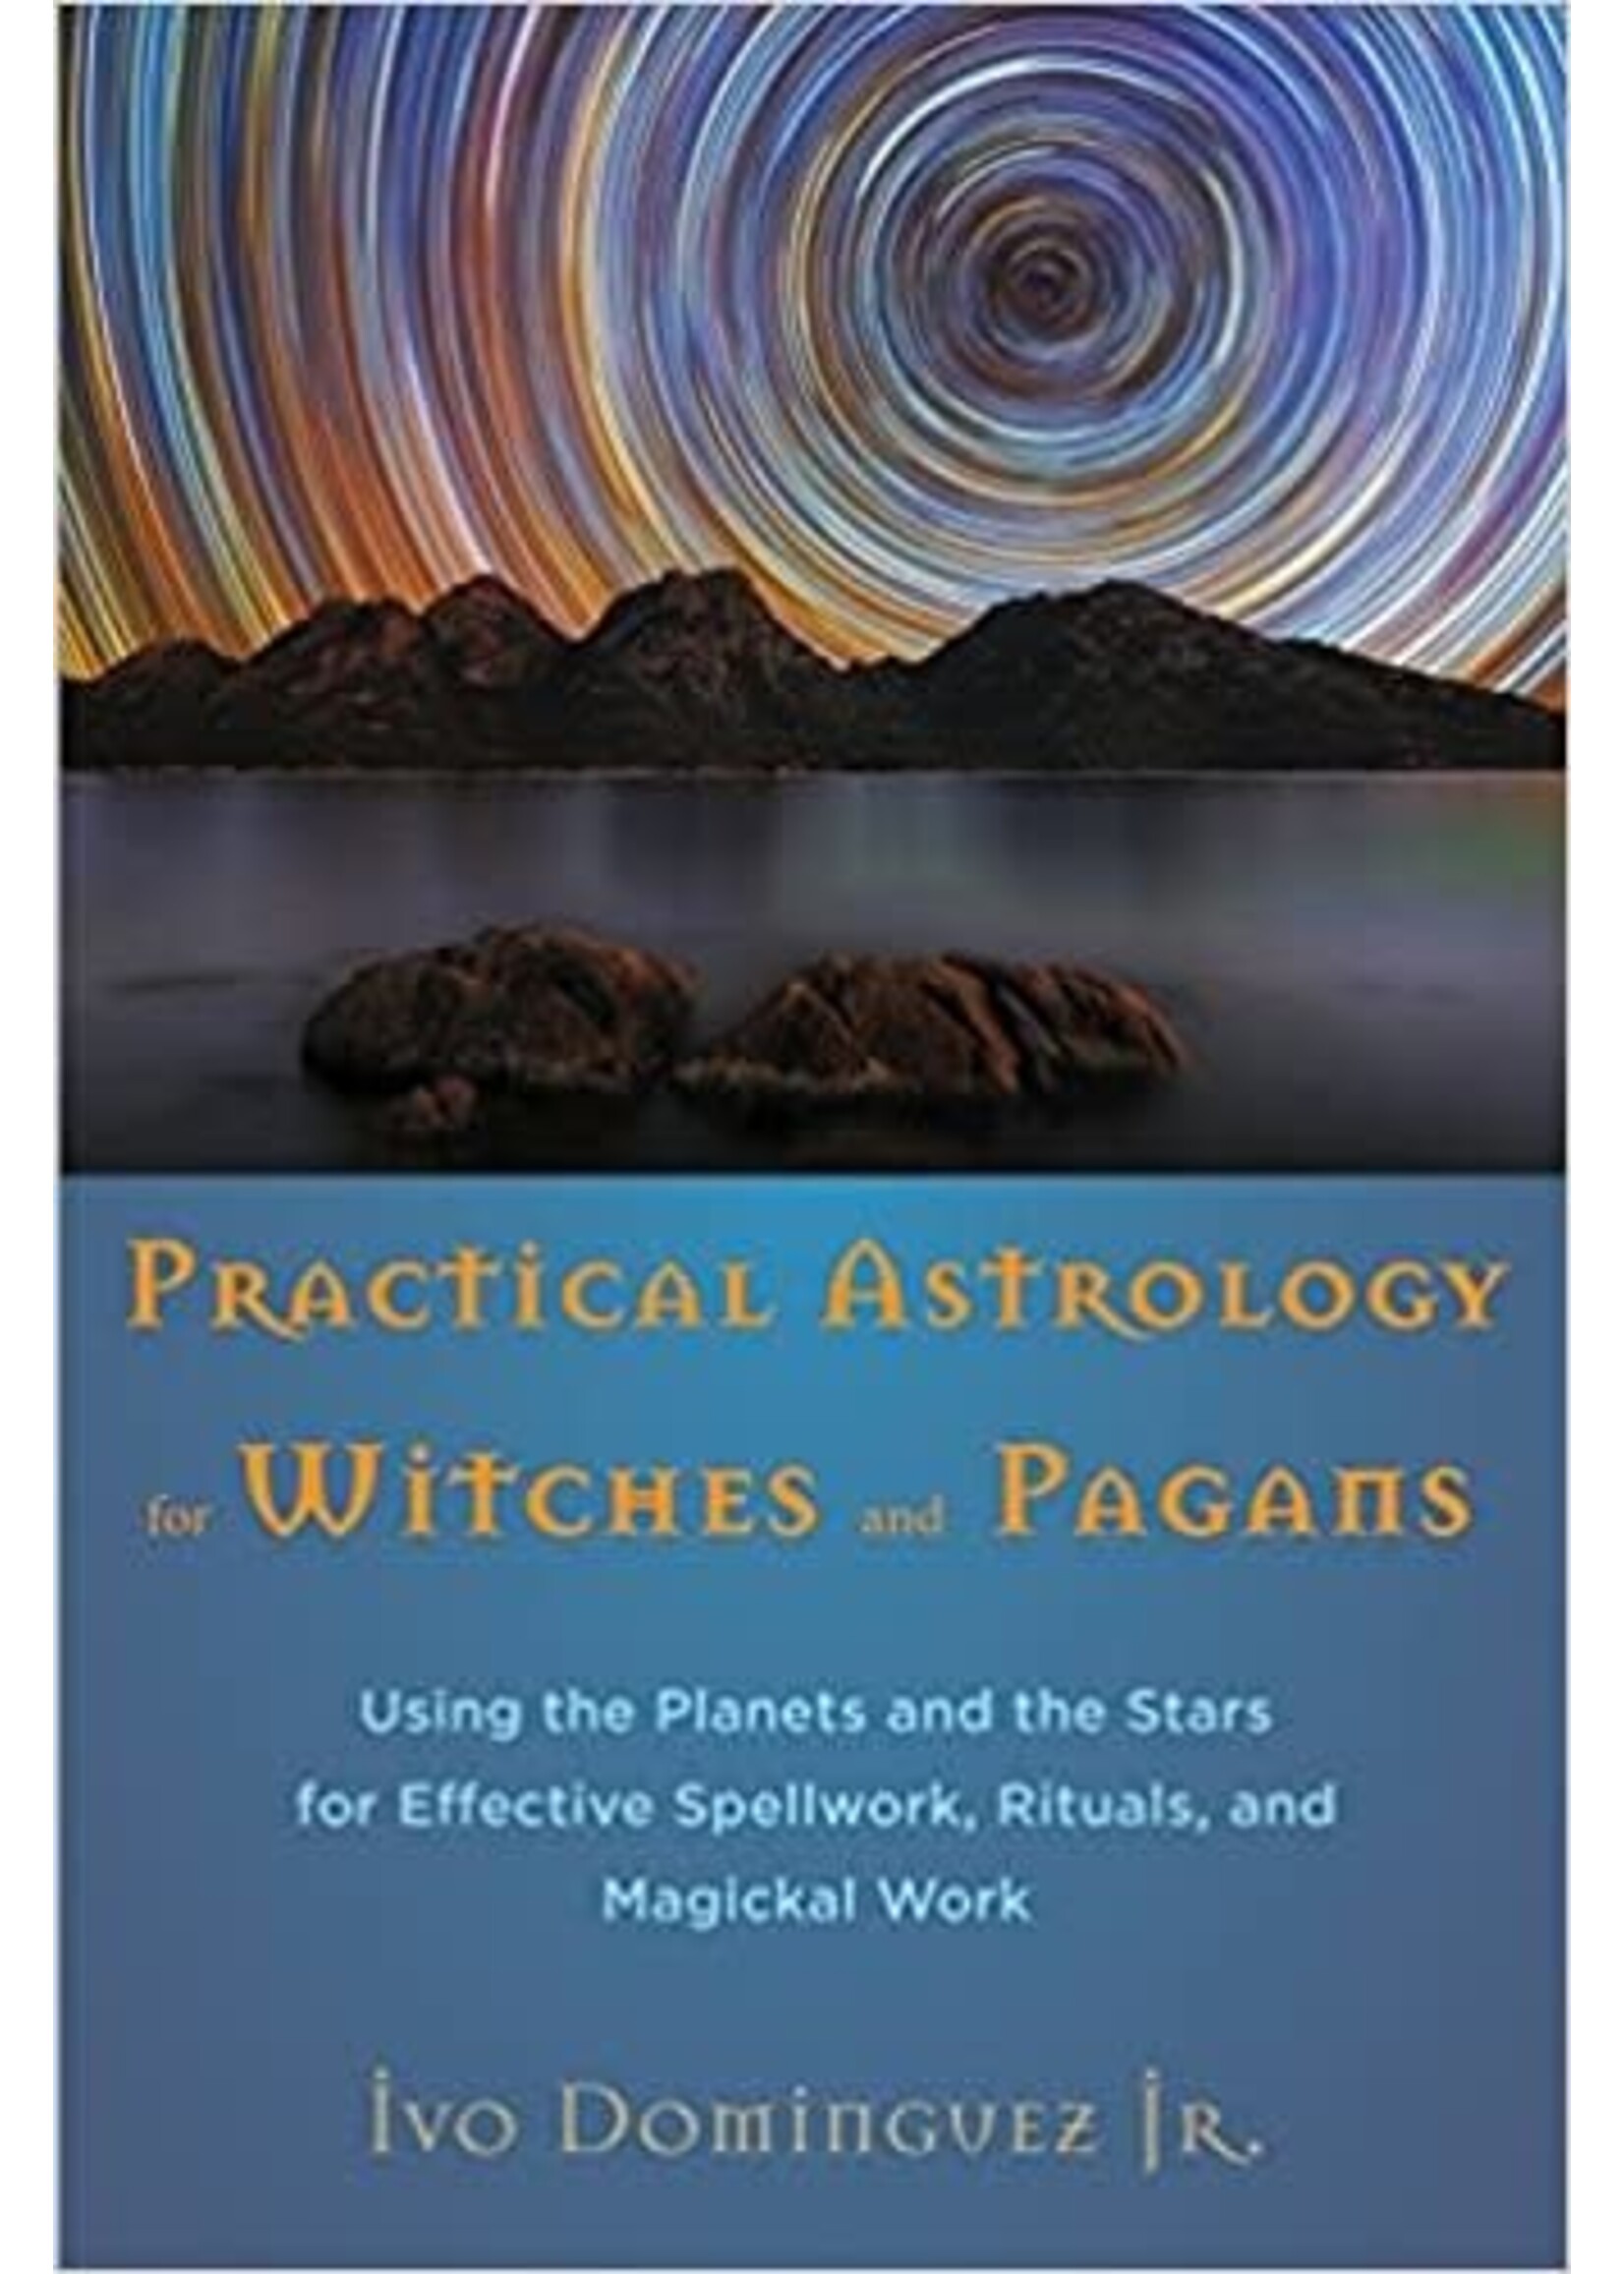 Practical Astrology For Witches by Ivo Dominguez Jr.